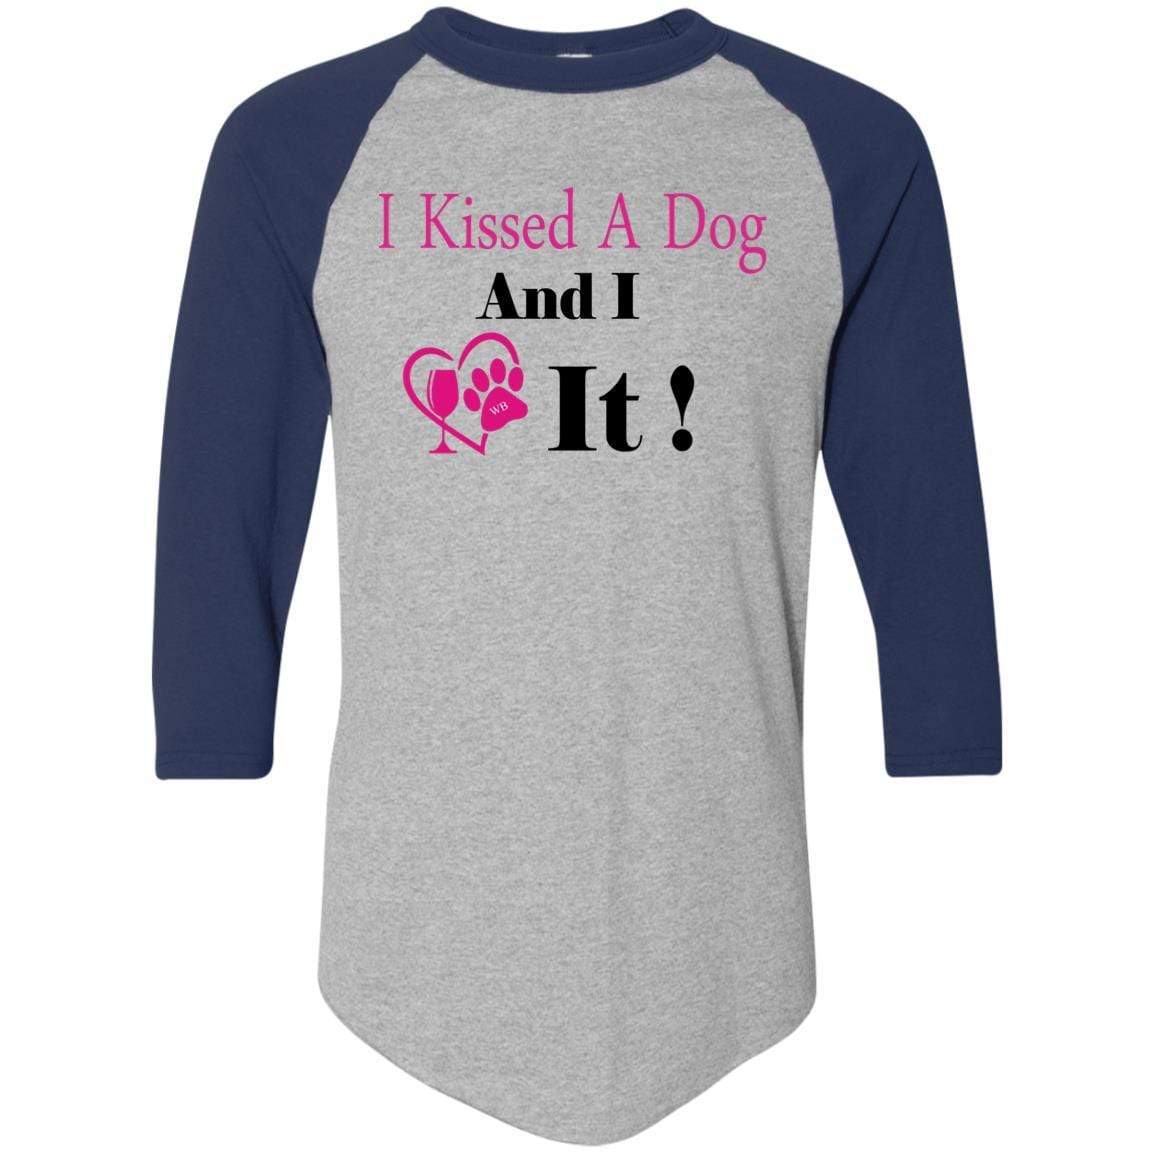 T-Shirts Athletic Heather/Navy / S WineyBitches.co "I Kissed A Dog And I Loved It:" Colorblock Raglan Jersey WineyBitchesCo